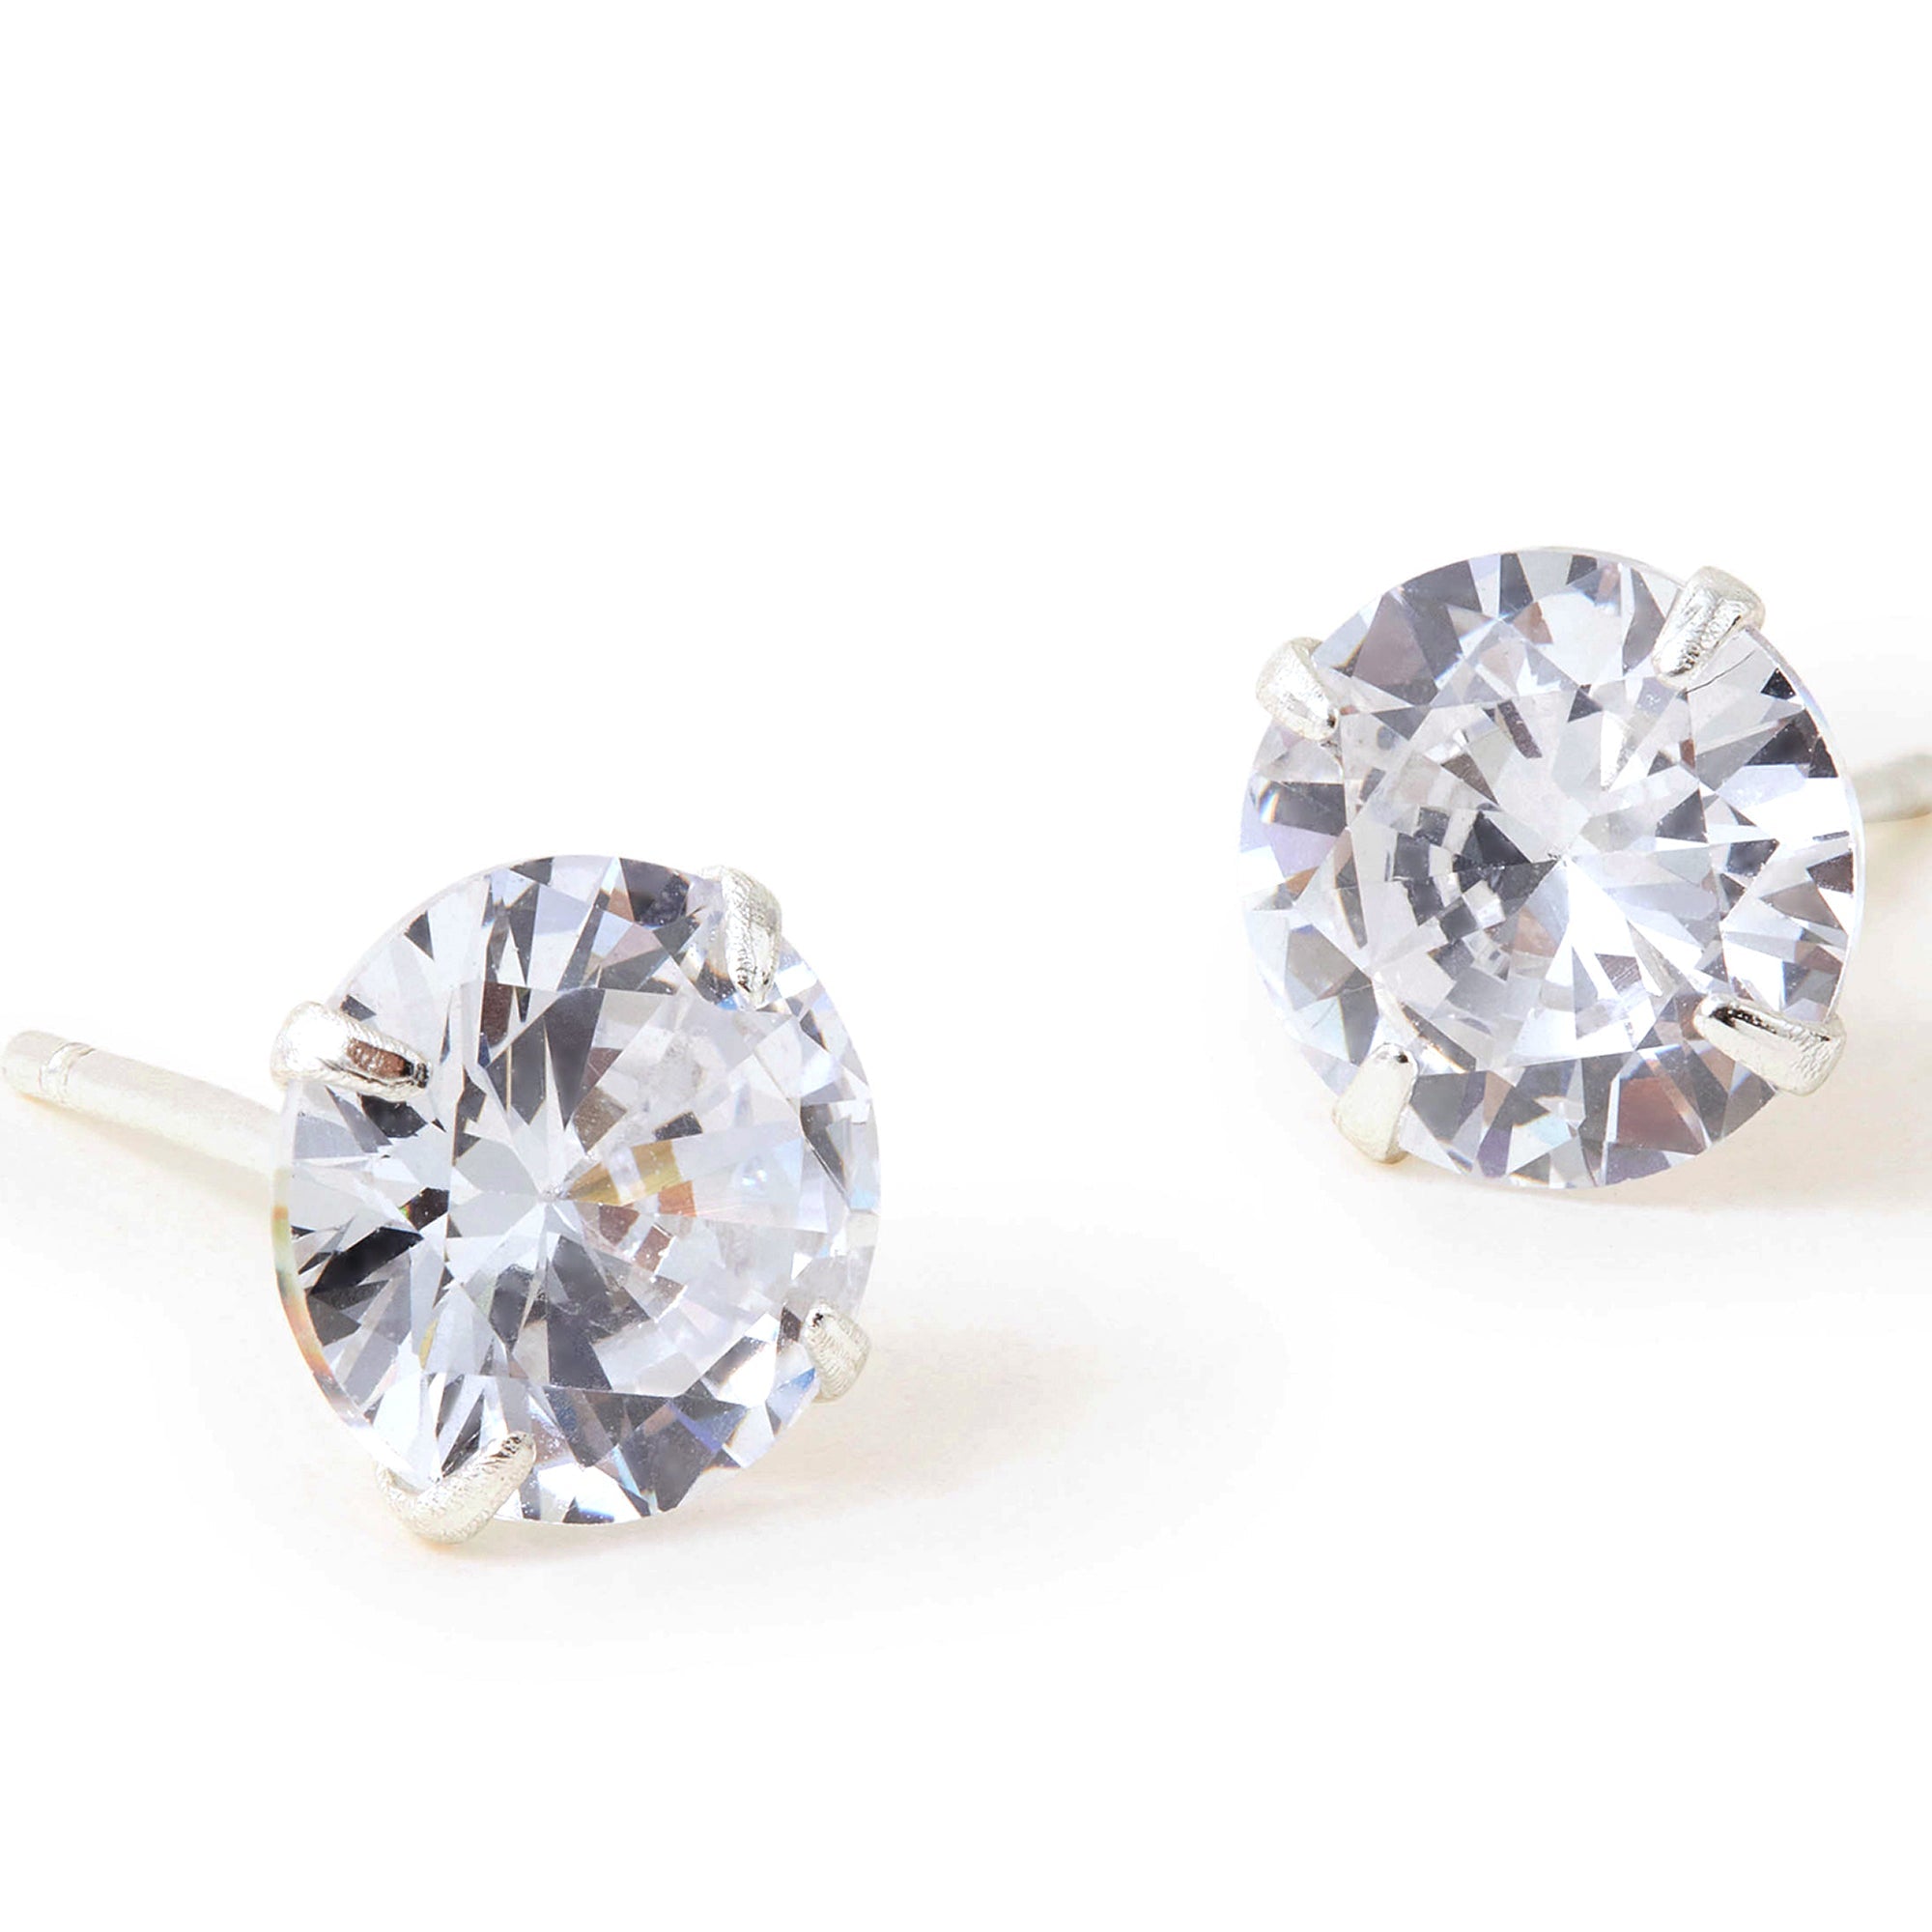 Delicate Diamante Stud Earrings Diamante | French Connection UK